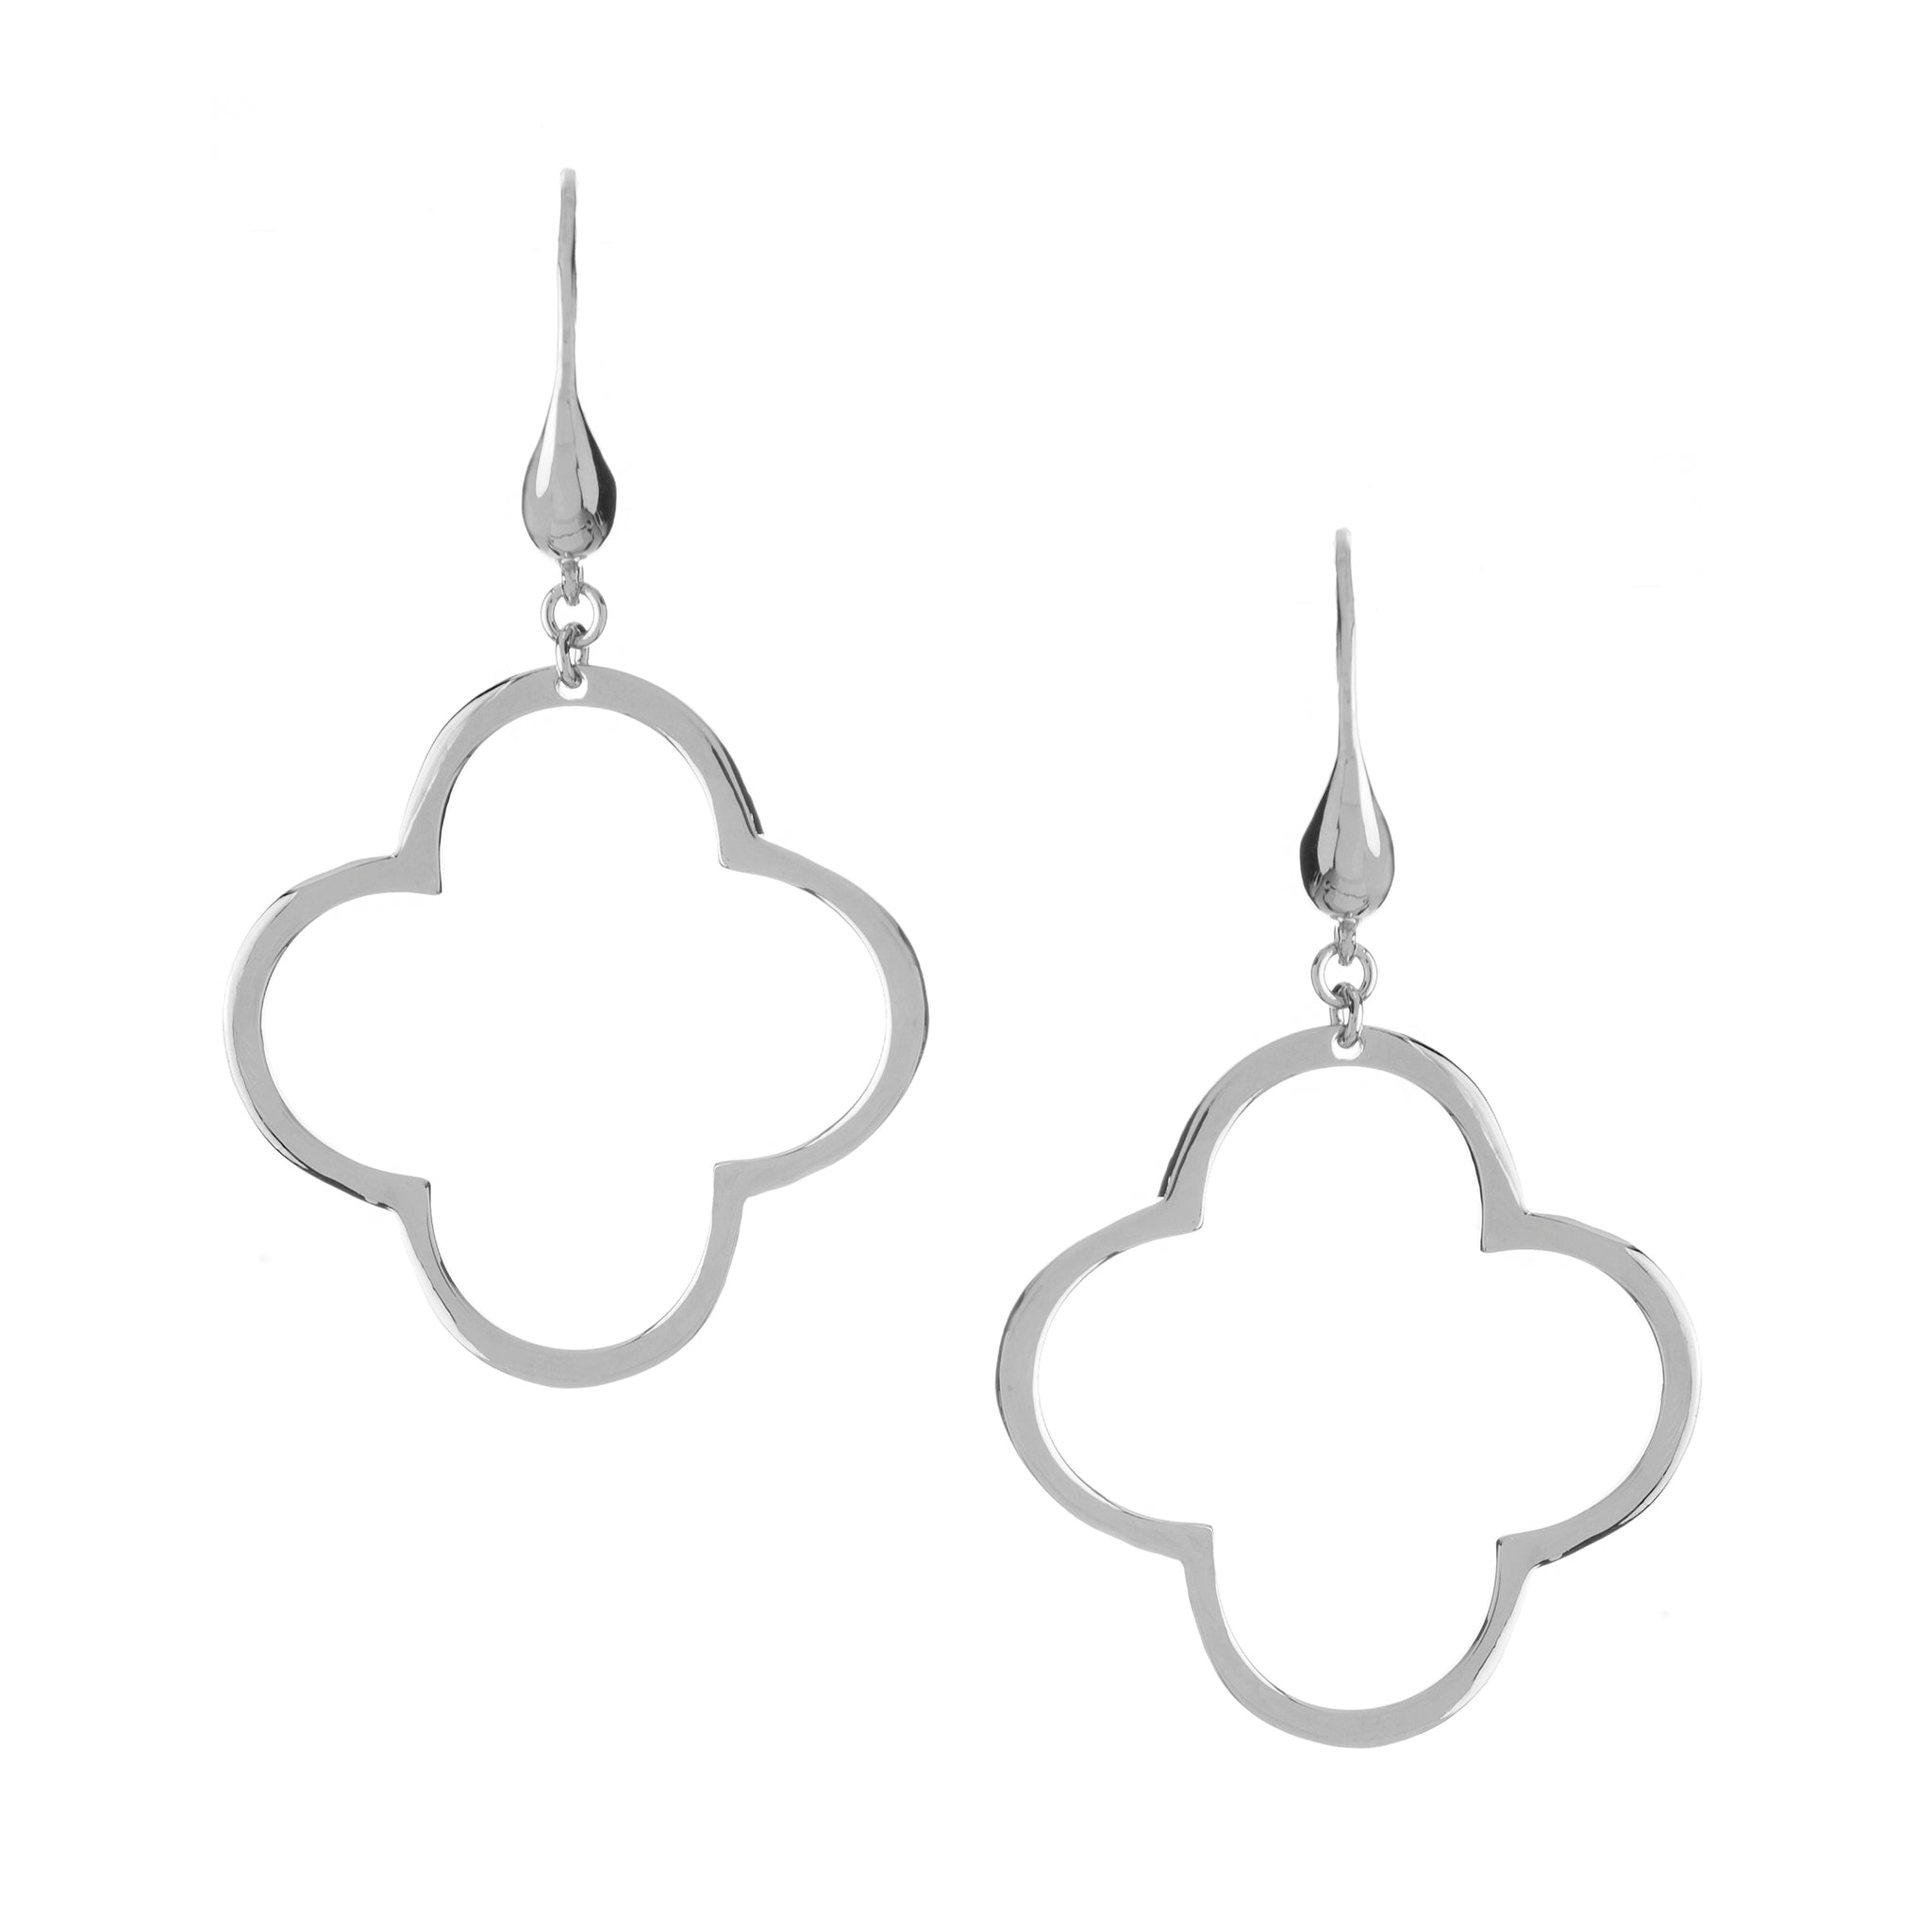 Shop Four Leaf Clover Dangling Earrings with great discounts and